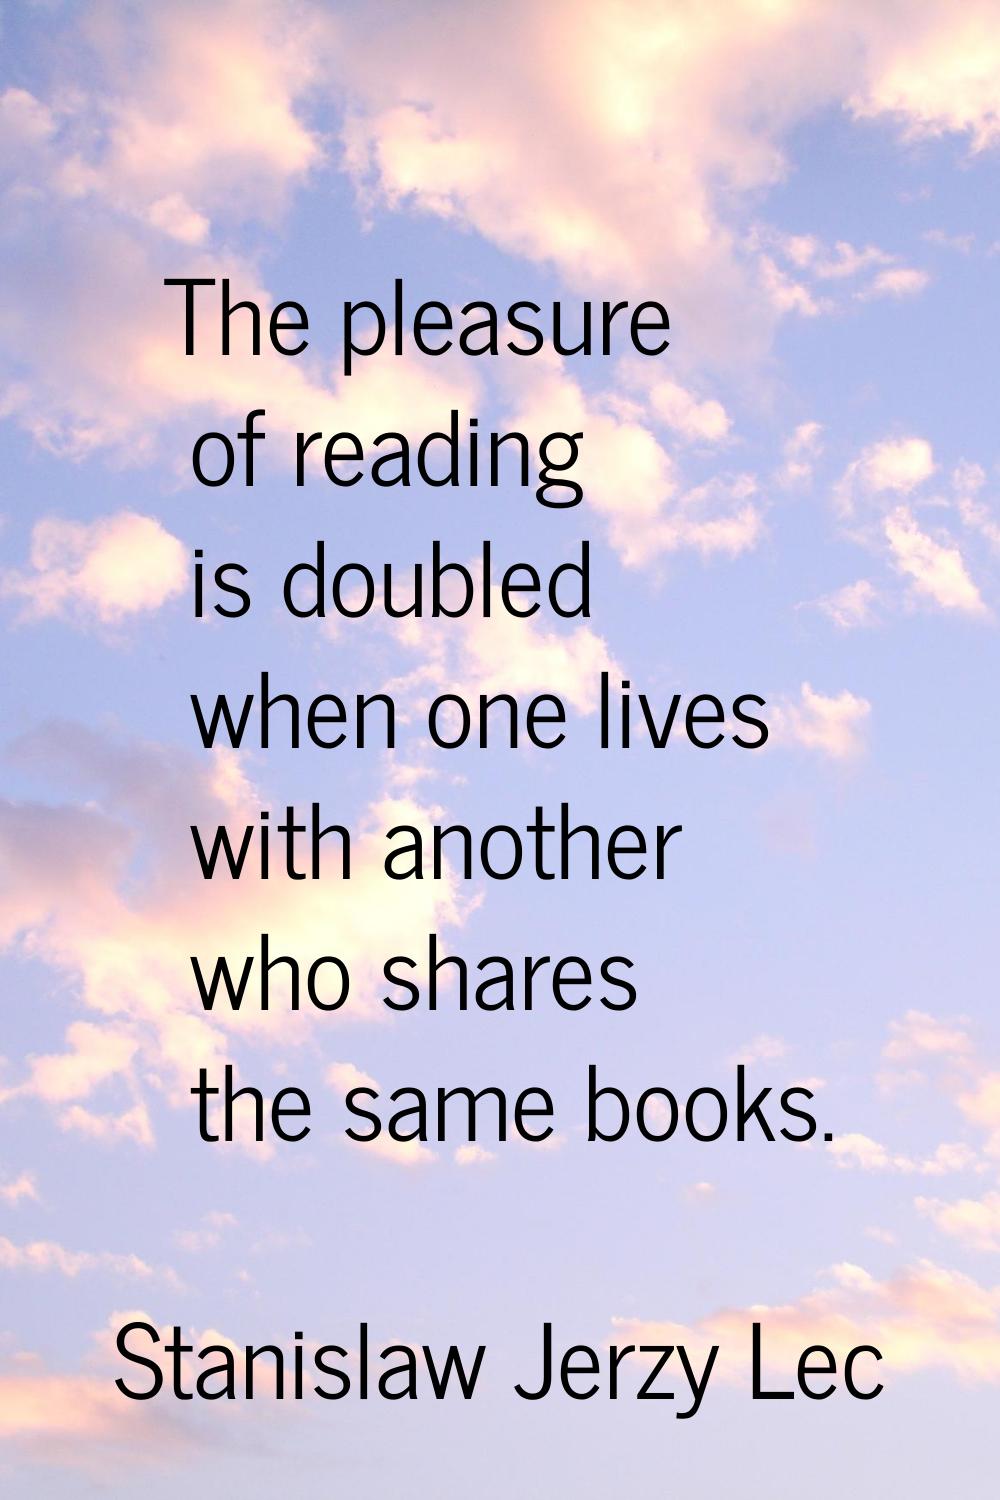 The pleasure of reading is doubled when one lives with another who shares the same books.